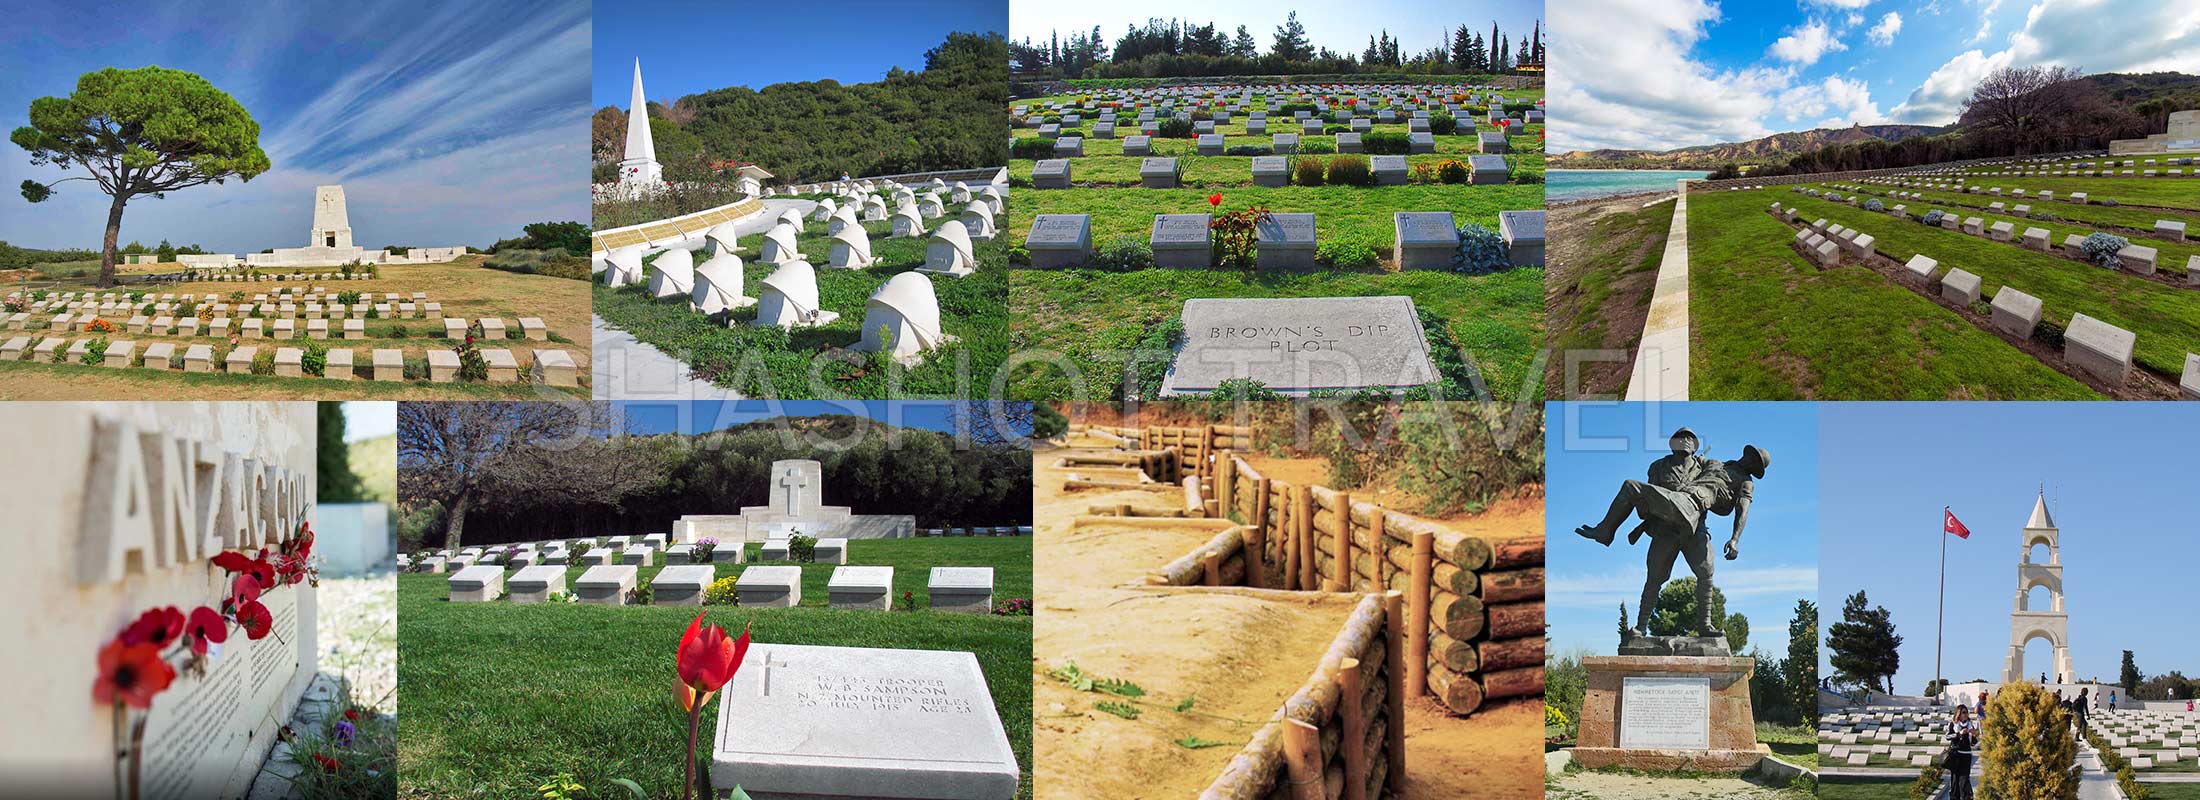 gallipoli-daily-tour-from-istanbul-turkey